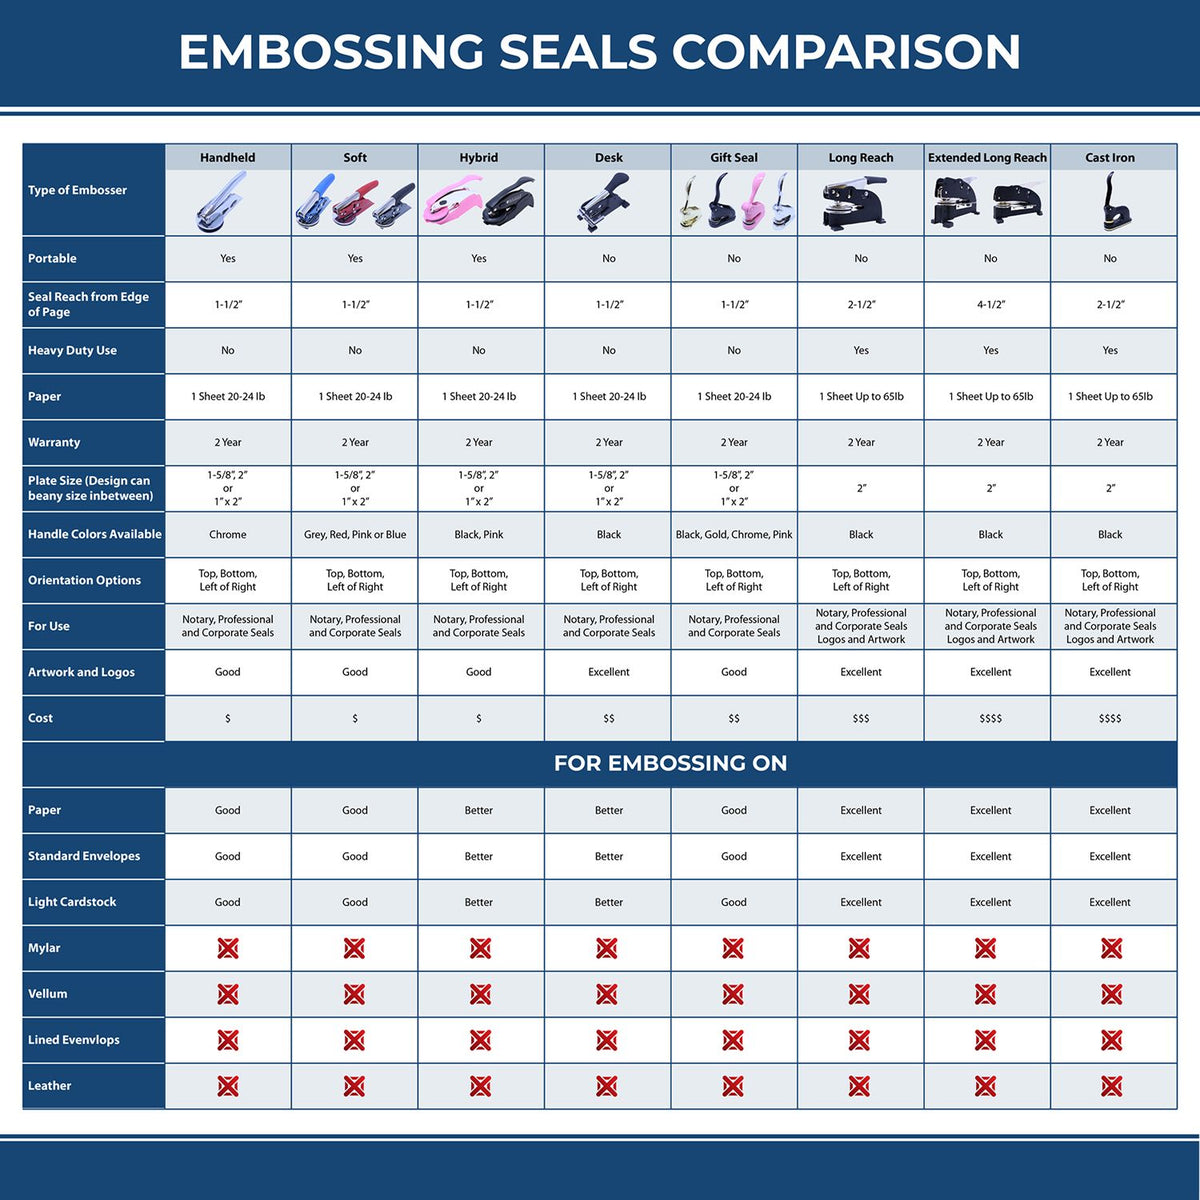 A comparison chart for the different types of mount models available for the Hybrid Alaska Geologist Seal